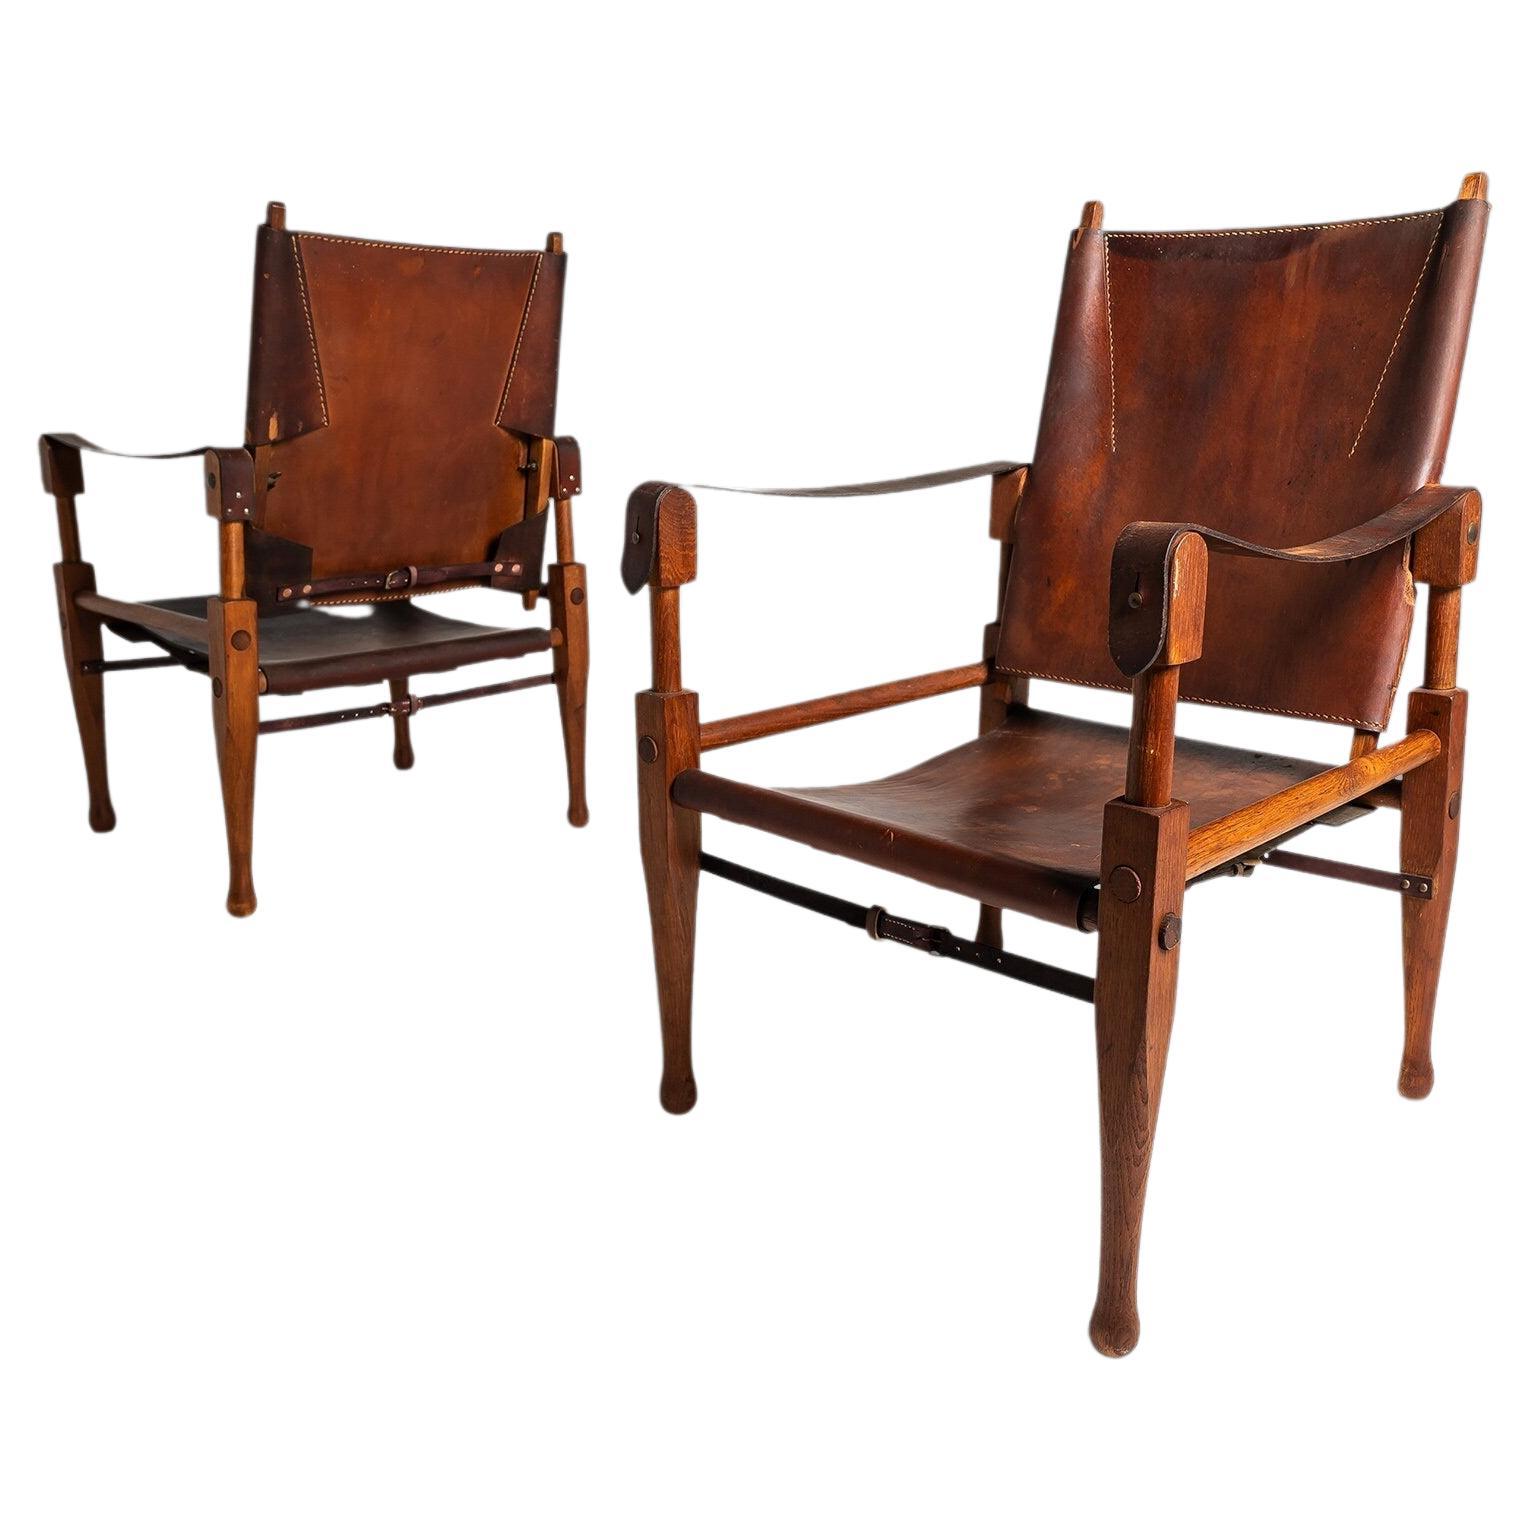 Set of Two '2' Leather Safari Chairs by Wilhelm Kienzle for Wohnbedarf, c. 1950s